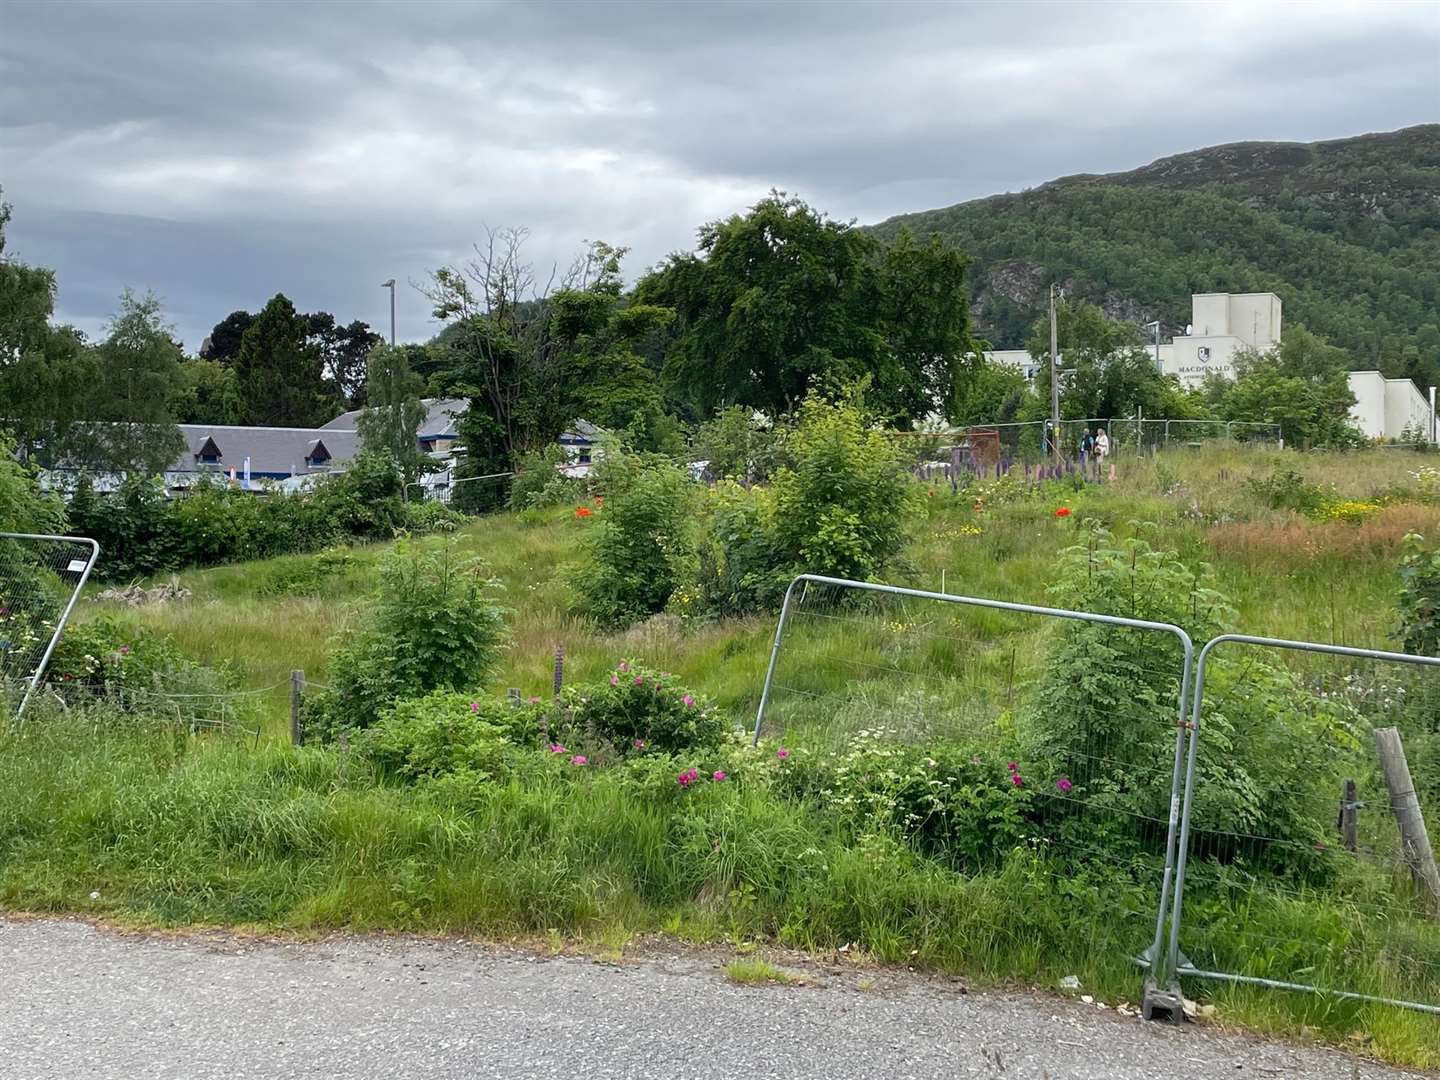 The site which has become an eyesore in the centre of Aviemore.